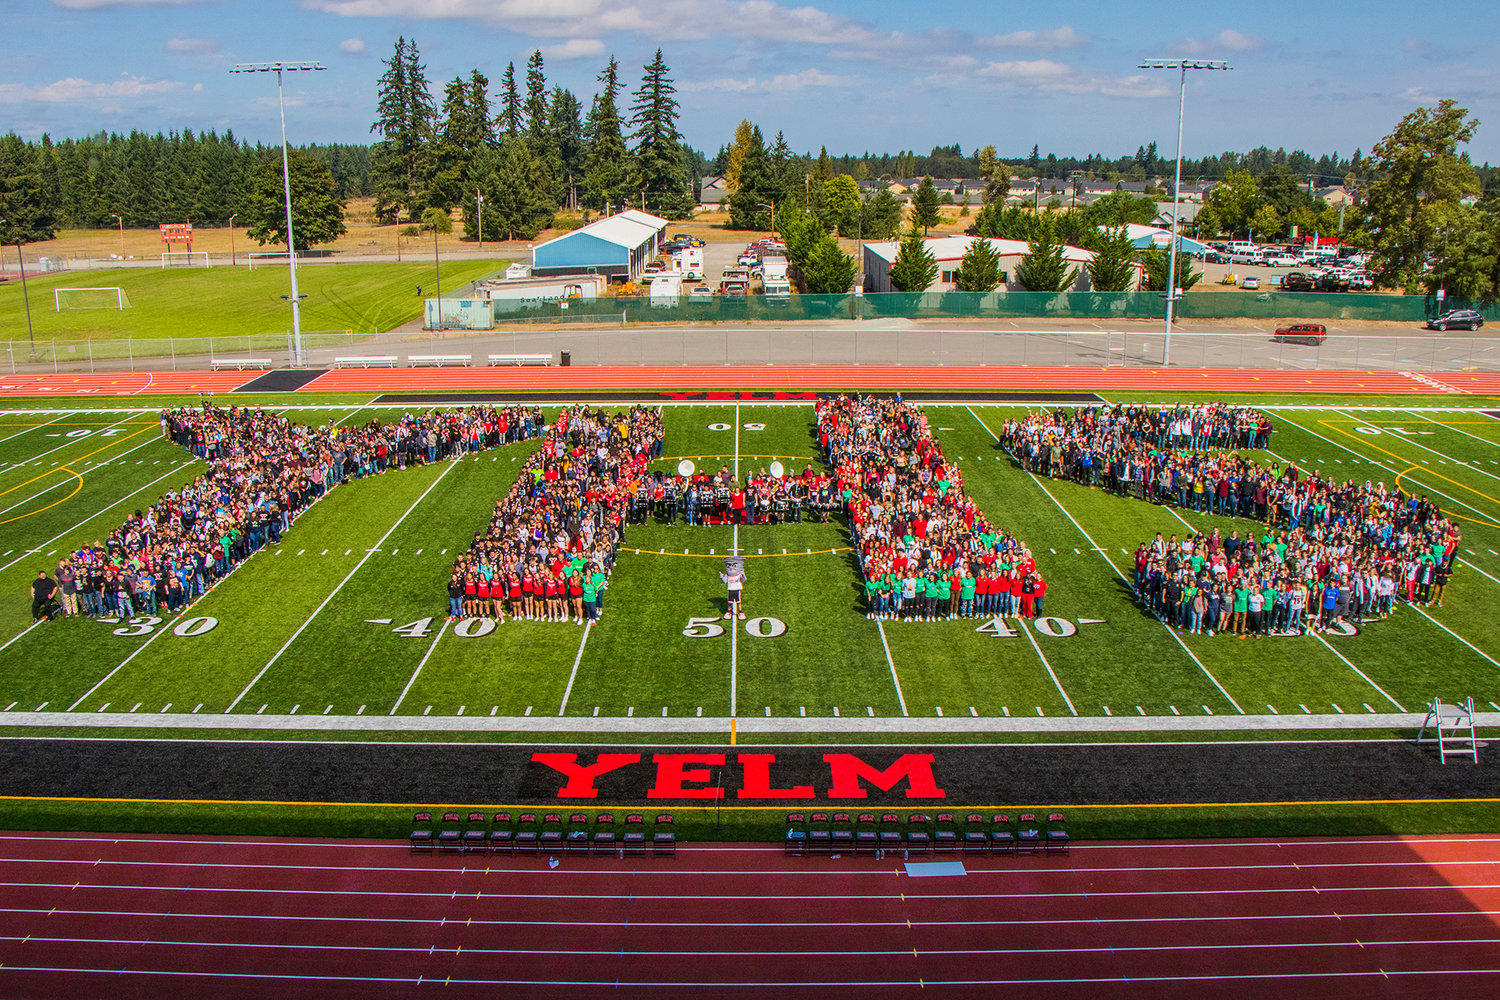 Yelm students and staff, among others, form "YHS" on the school's new turf during a celebration ceremony with the Seahawks last September. 